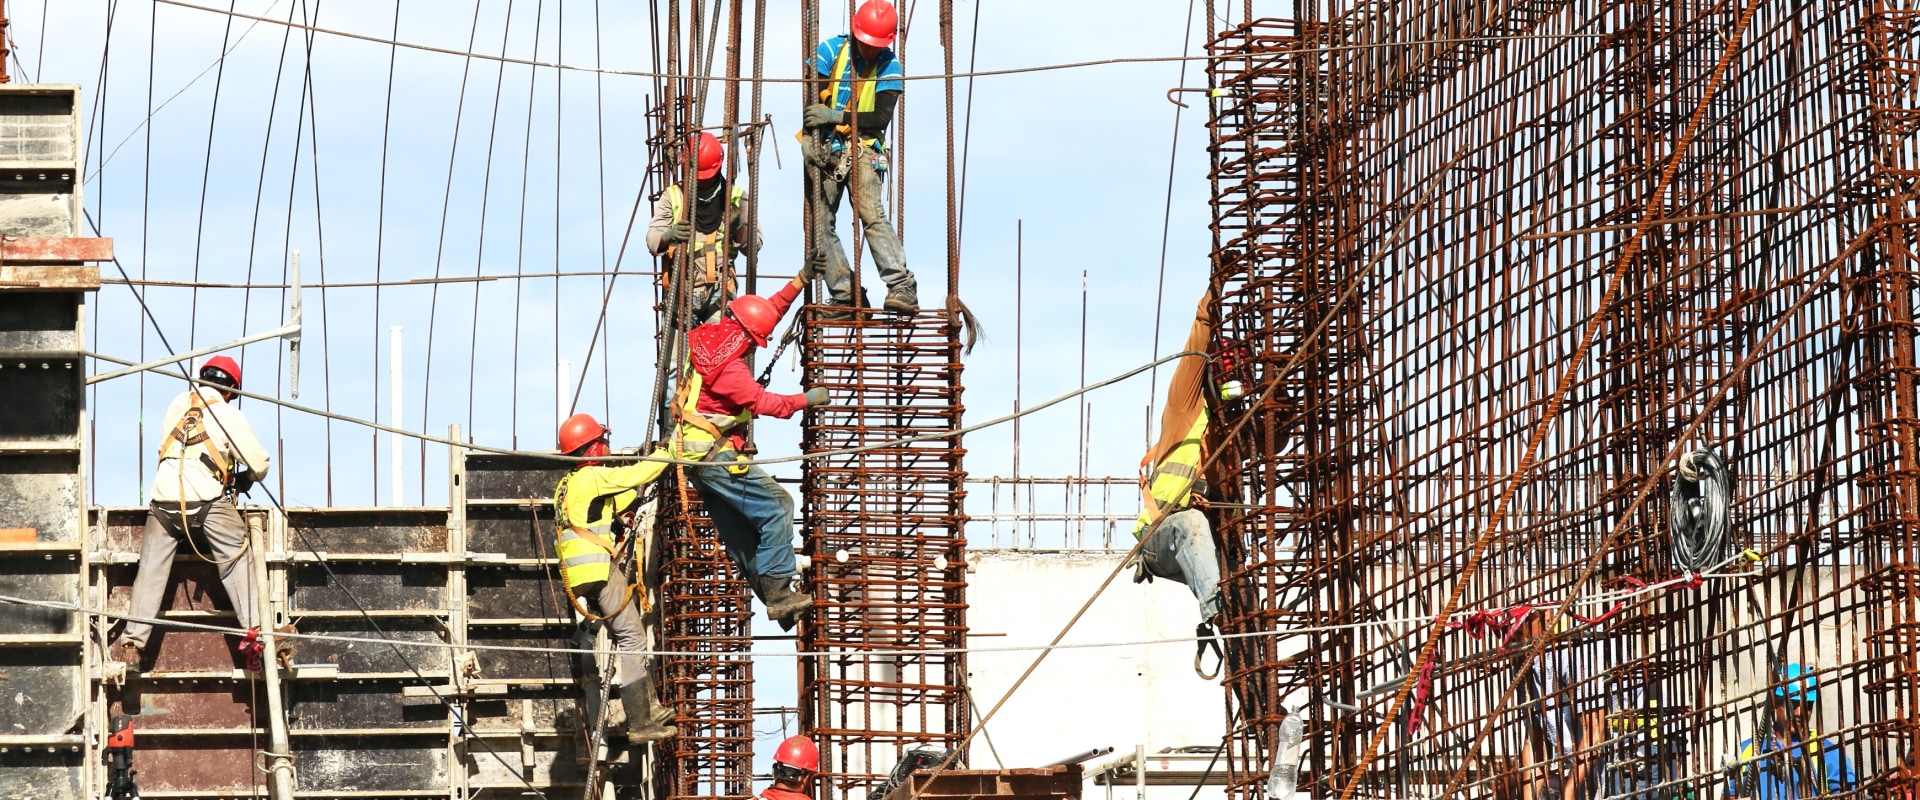 The Growing Demand for Building Construction